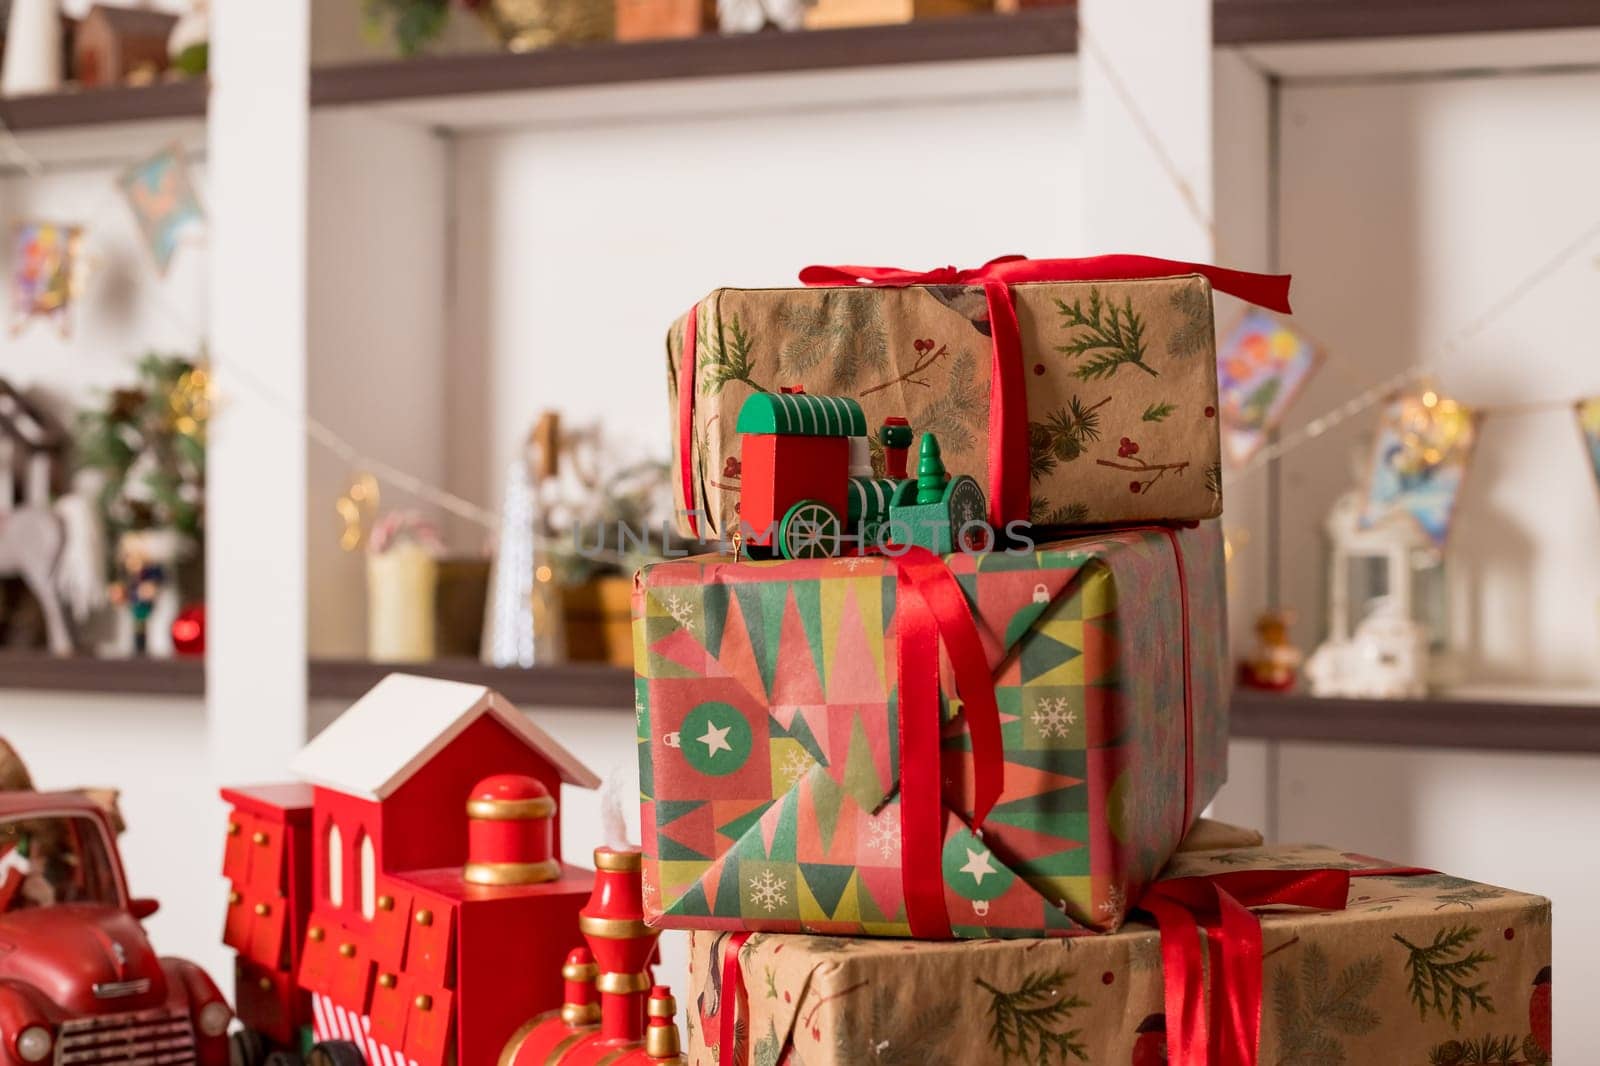 Stacks of Christmas presents under a Christmas tree with defocused lights